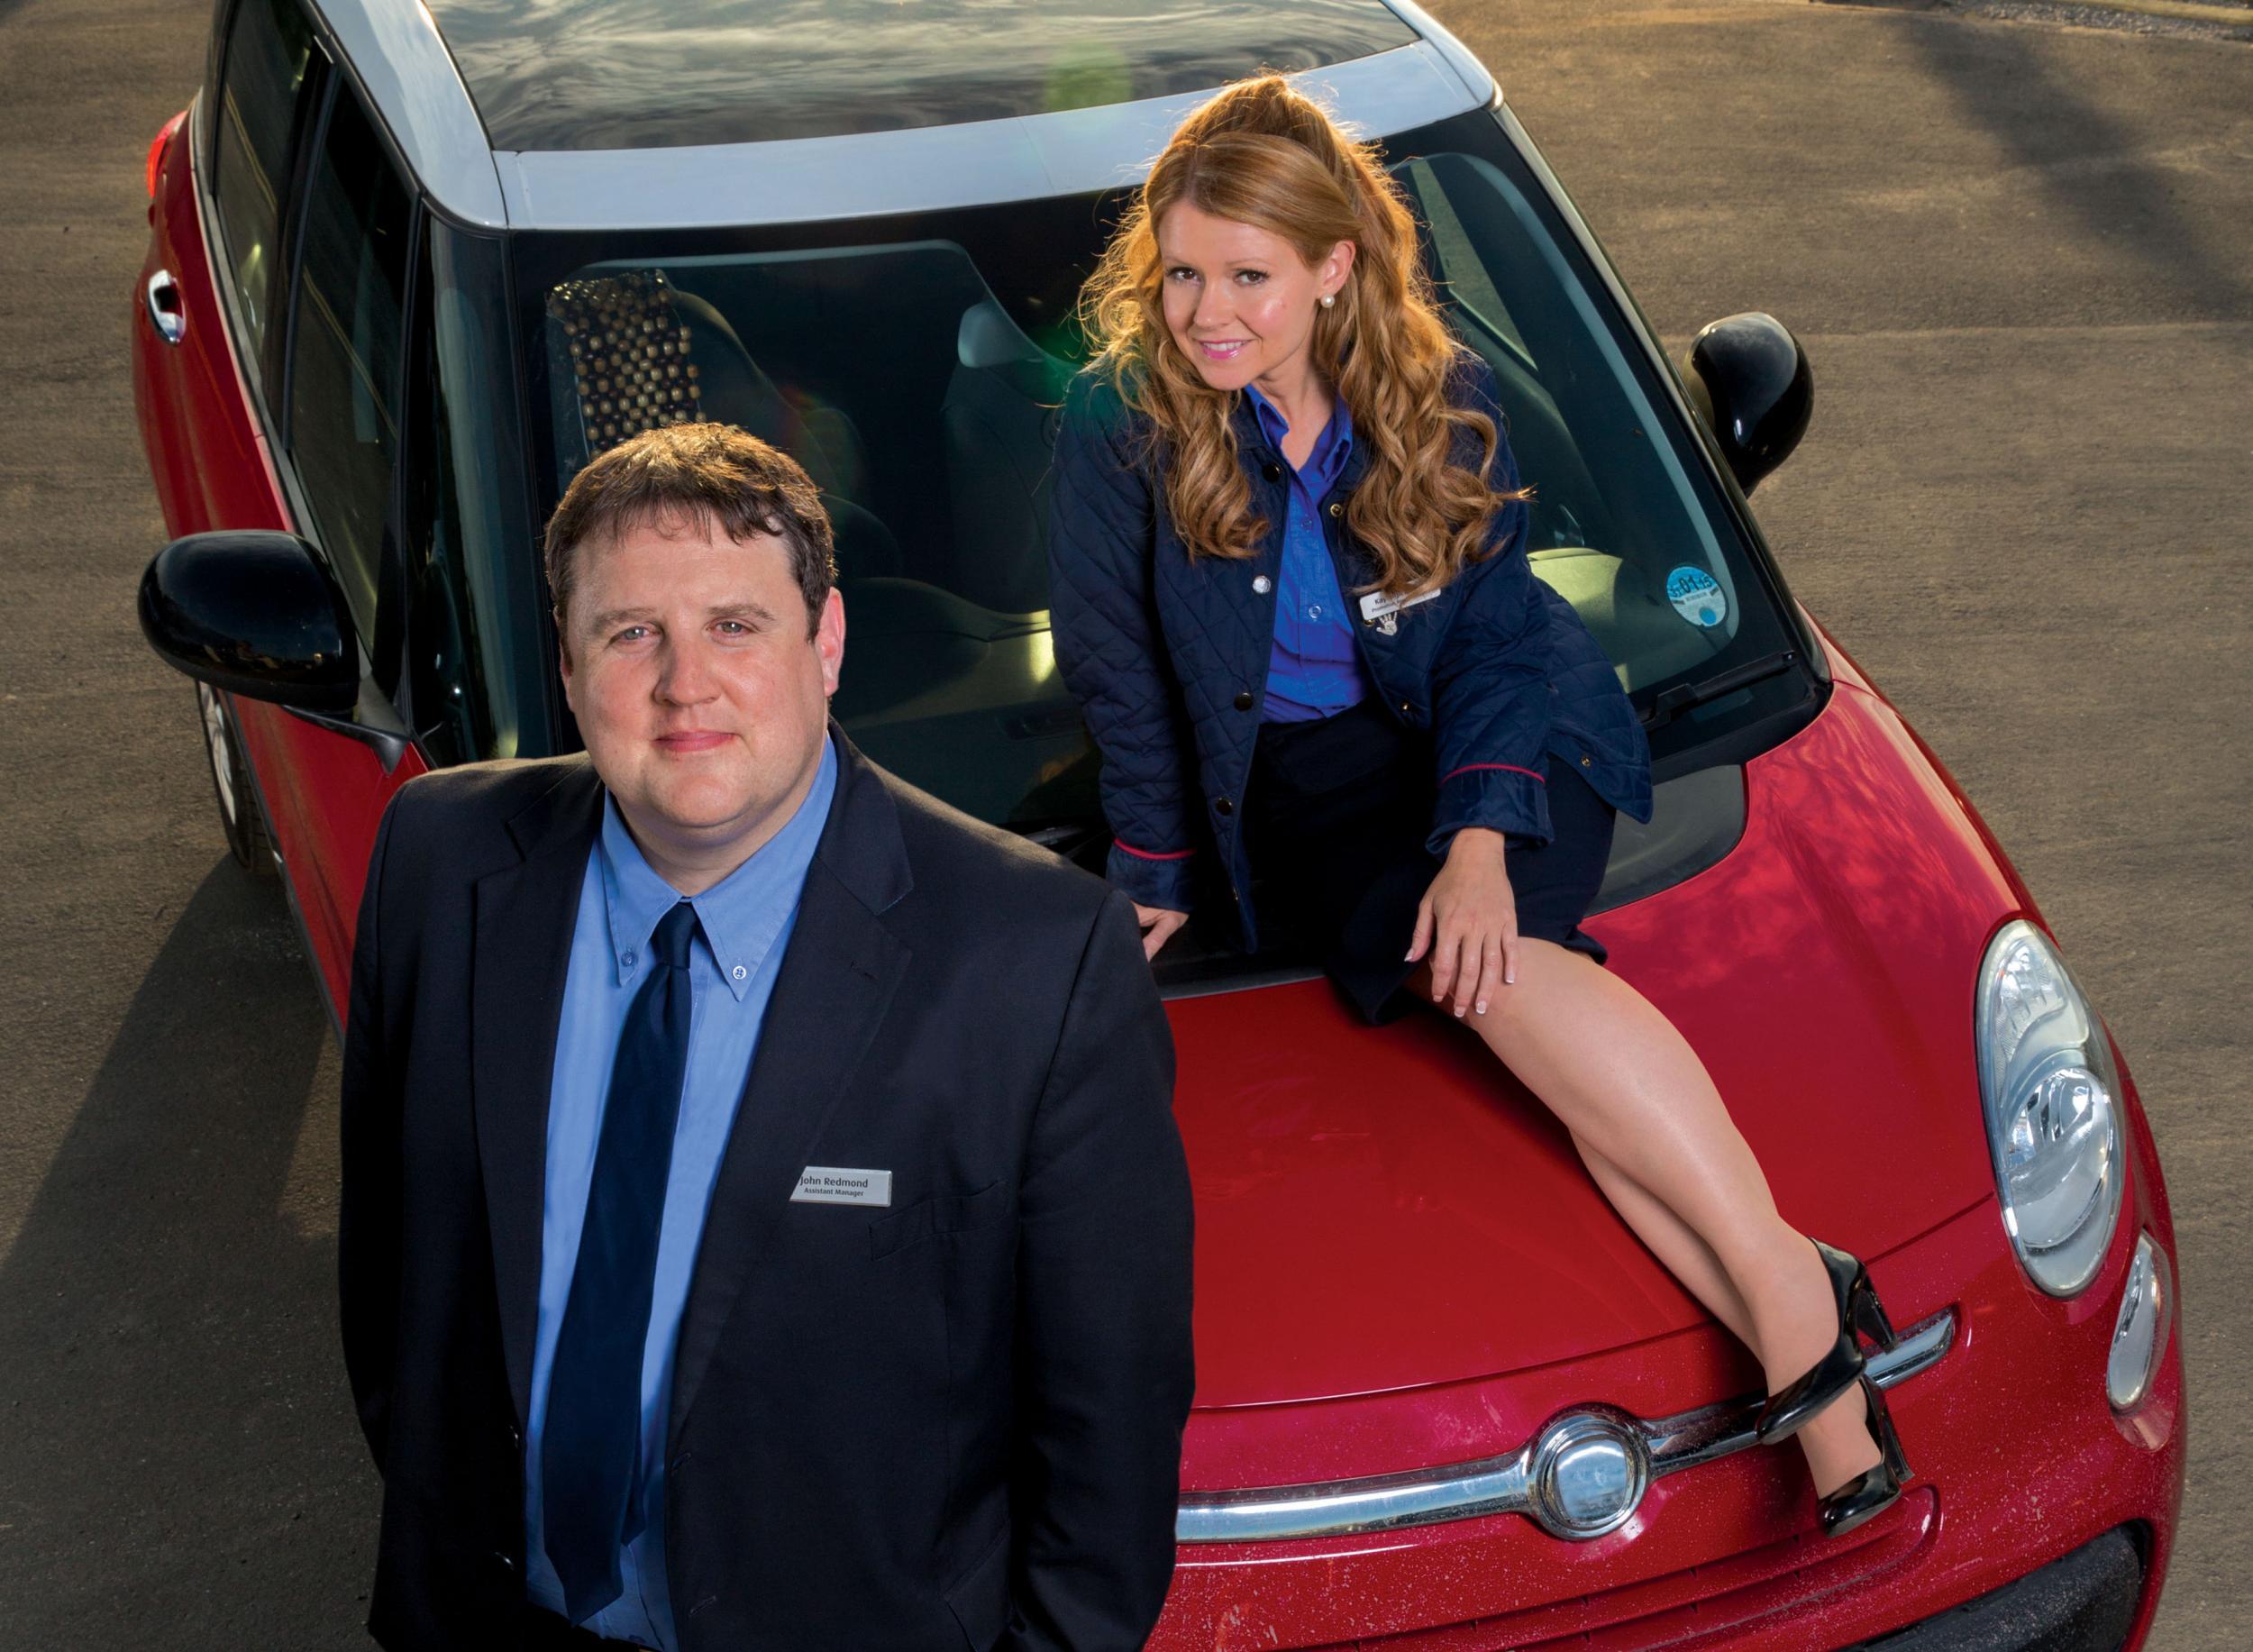 Fiat accompli: the burgeoning romance between John and Kayleigh steered clear of schmaltz in Peter Kay’s comedy vehicle